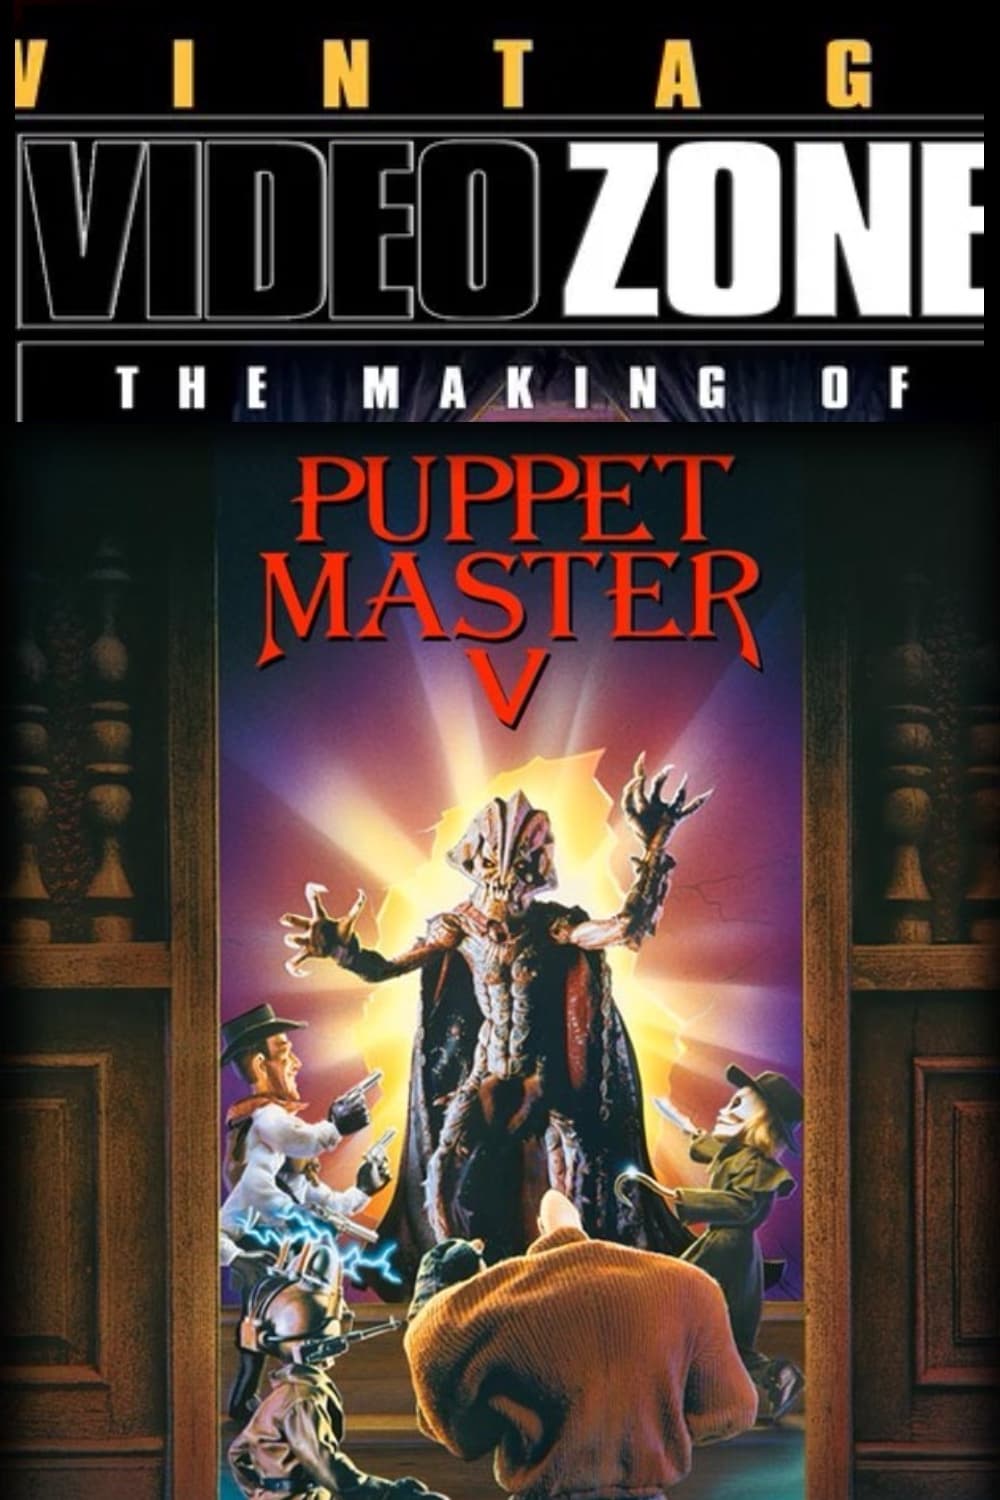 Videozone: The Making of "Puppet Master 5"